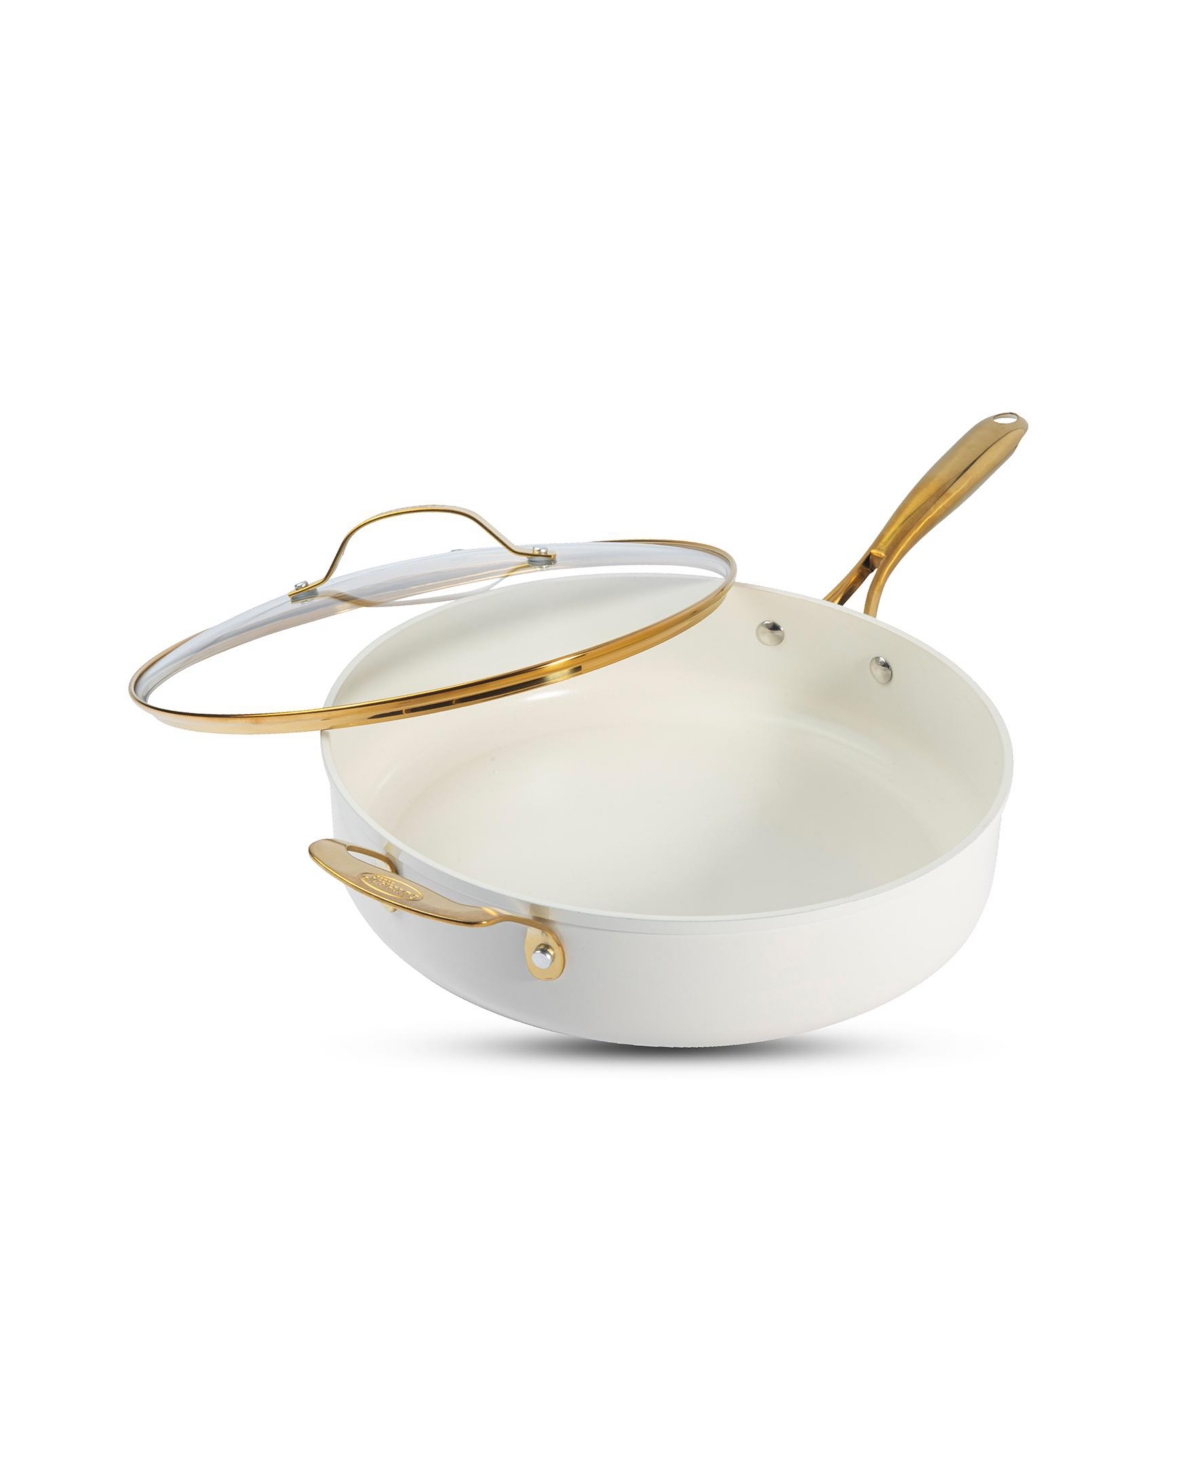 Gotham Steel Natural Collection Ceramic Coating Non-stick 5.5 Qt Deep Saute Pan With Lid And Gold-tone Handle In White